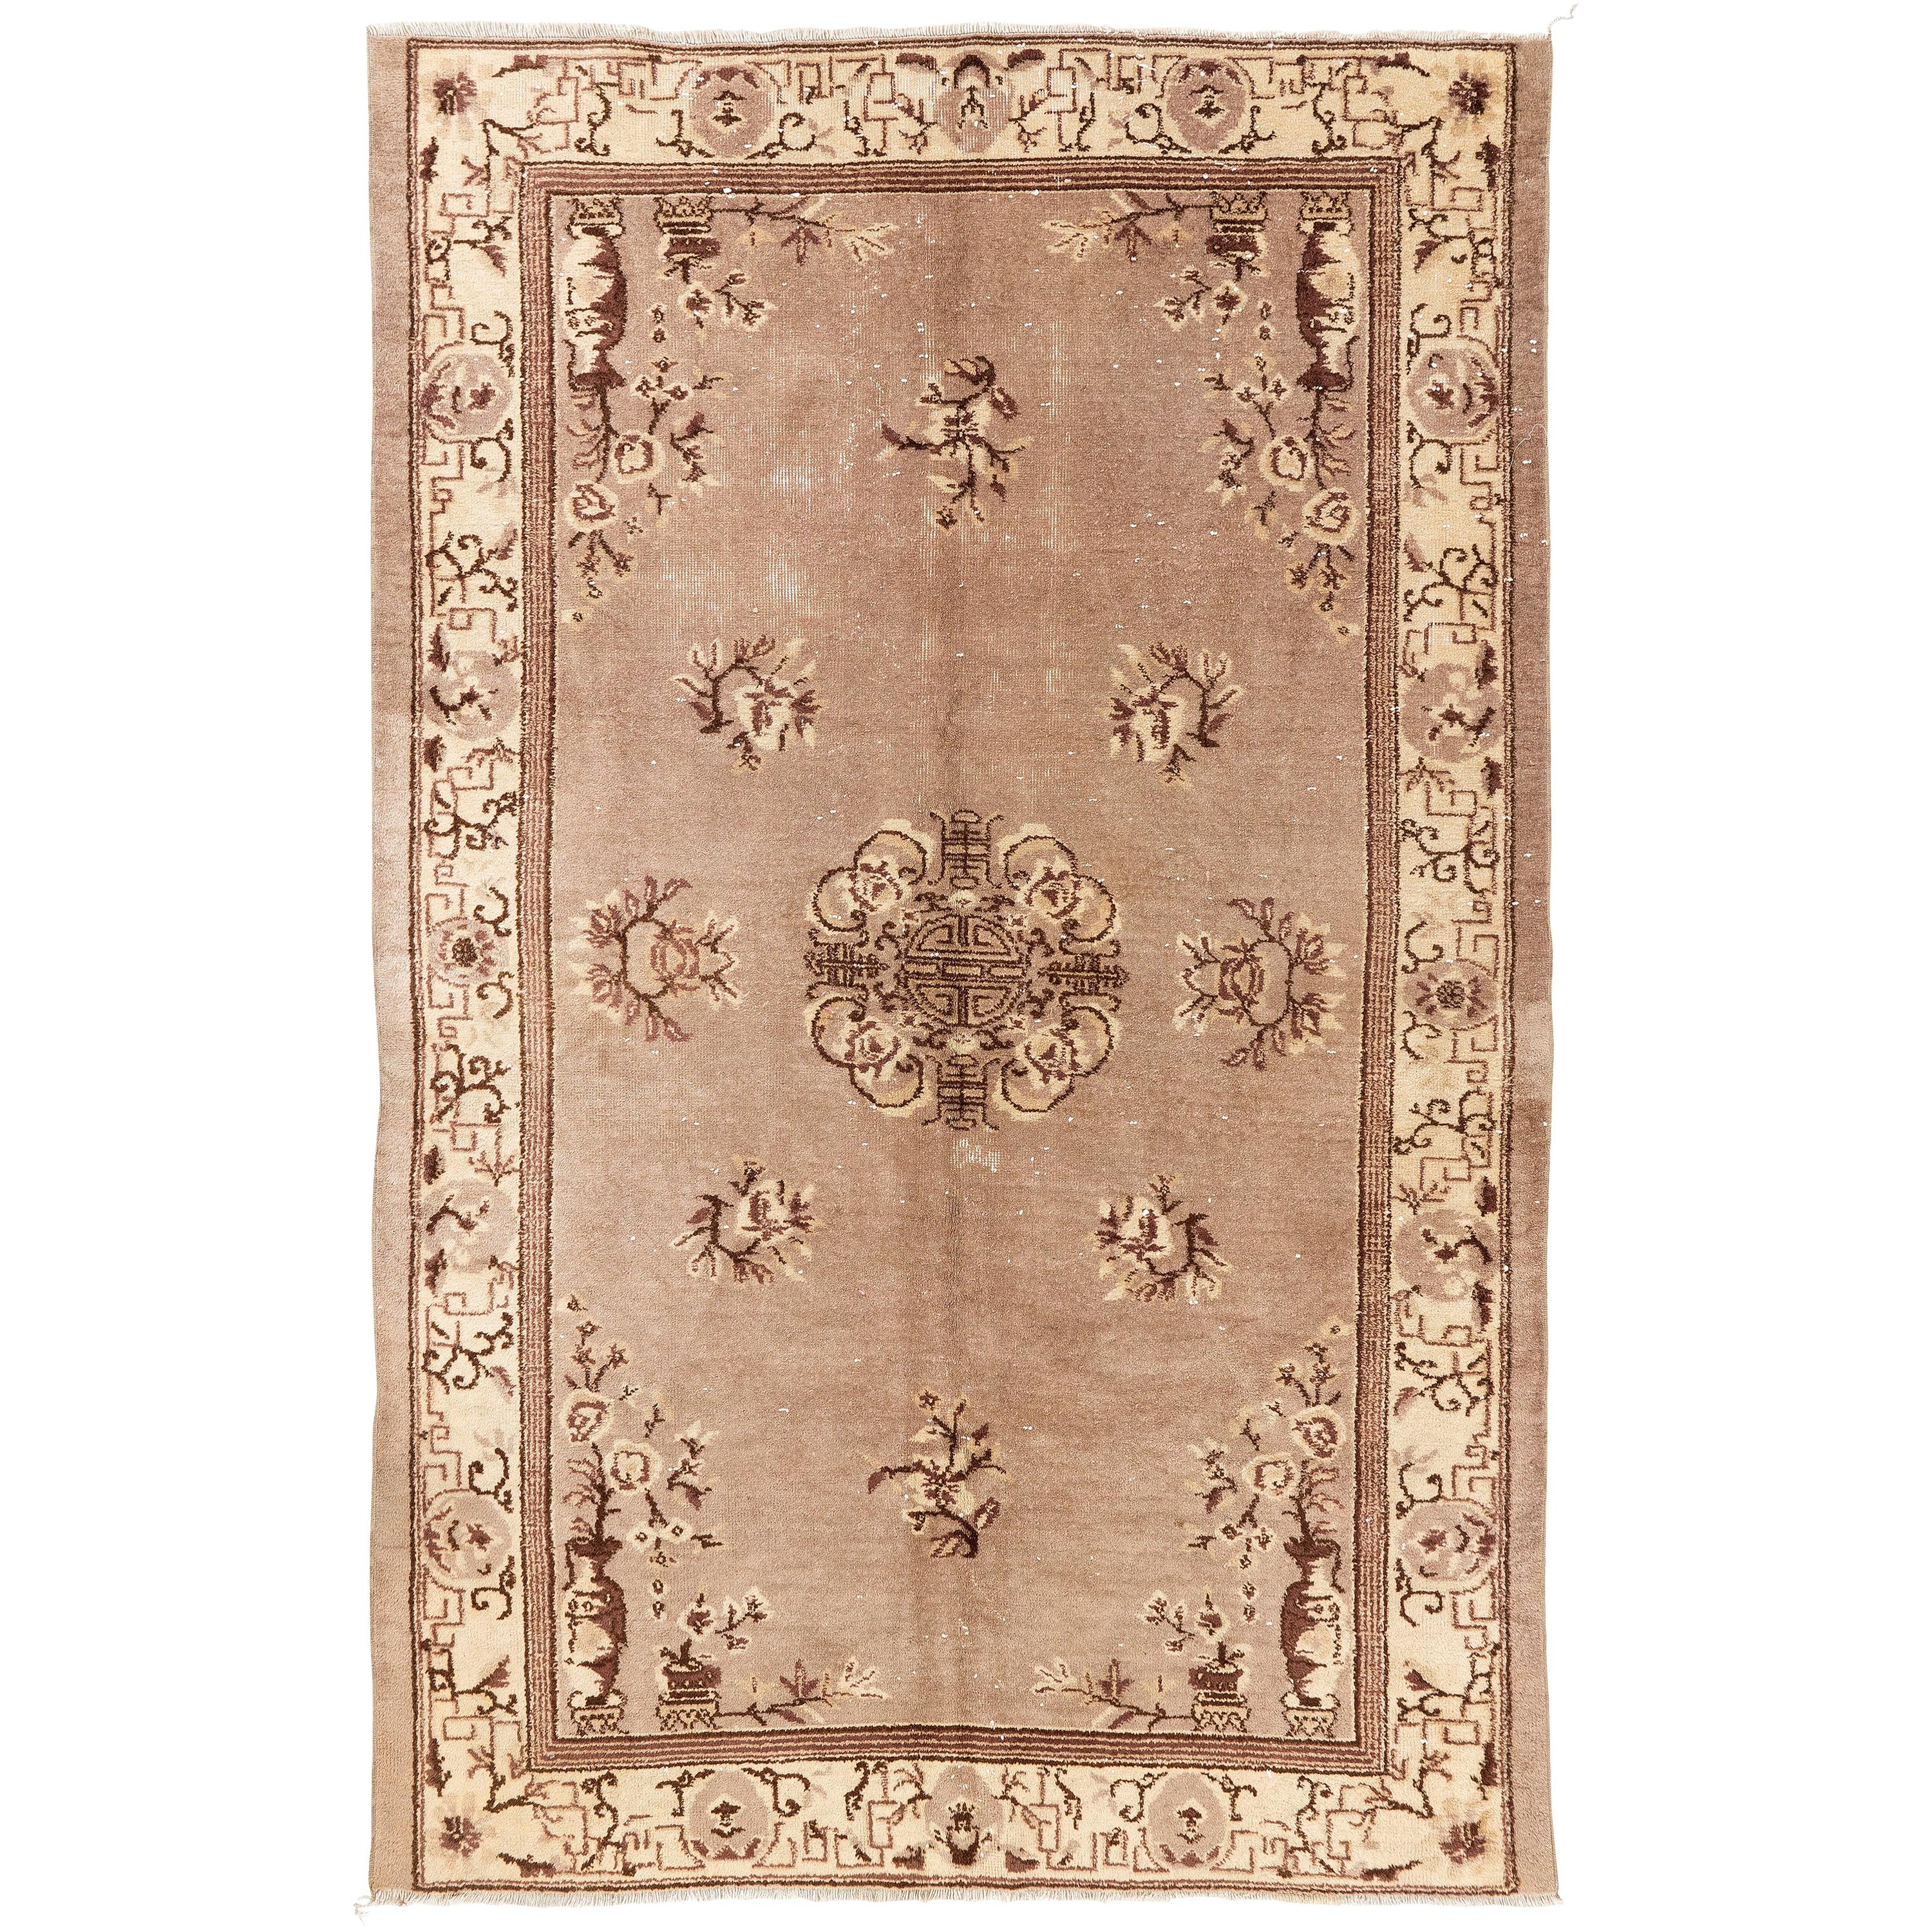 5.2x8 Ft Art Deco Chinese Rug in Soft Faded Taupe, Brown and Beige Colors